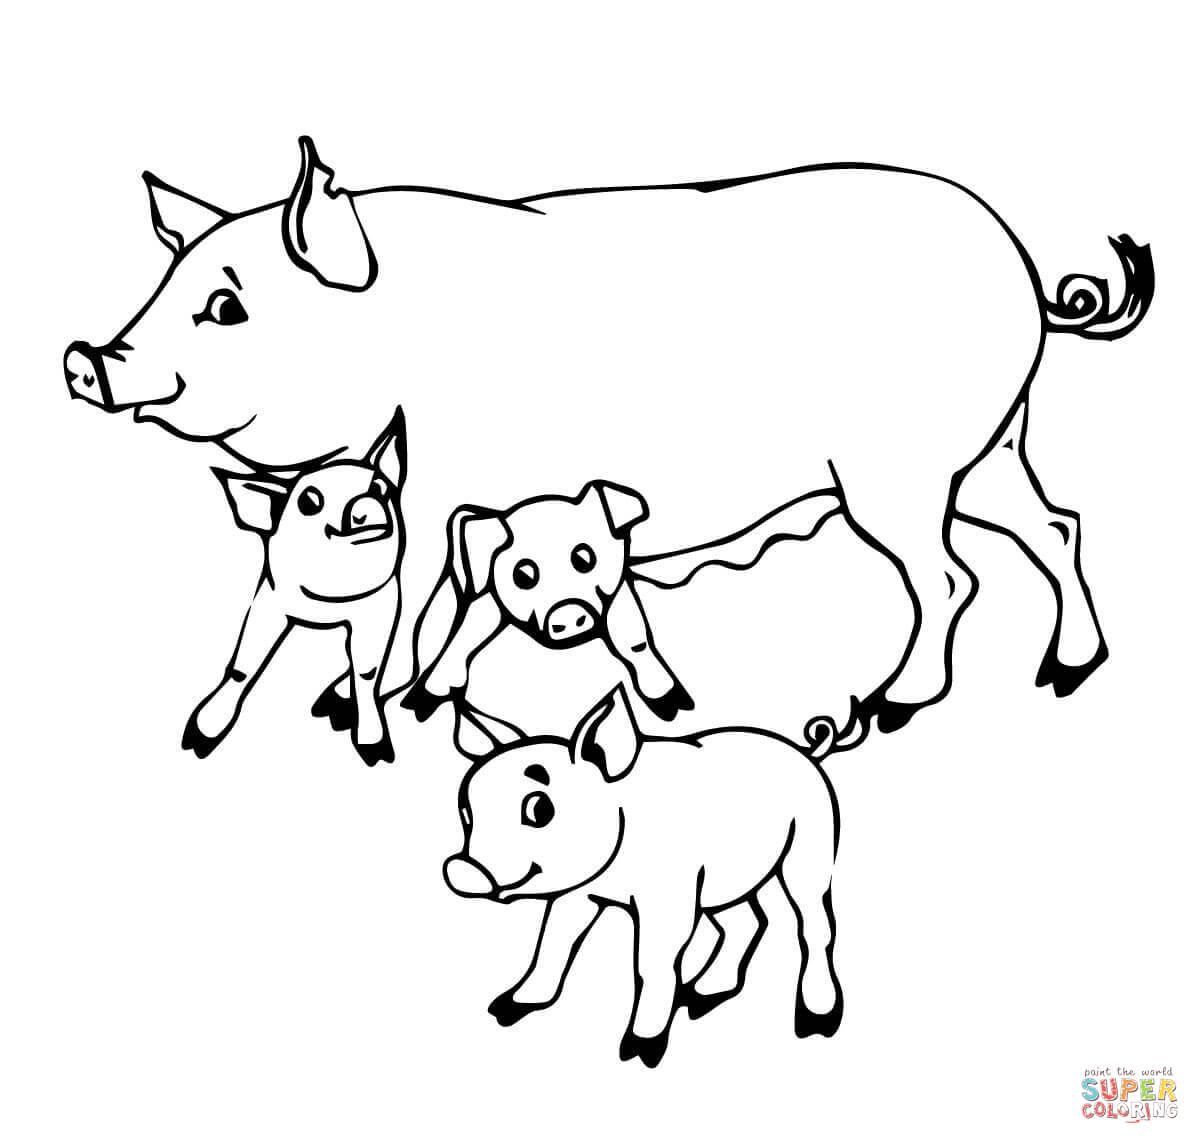 Baby Pig Coloring Pages
 Pig Mother and Baby Pigs Coloring line